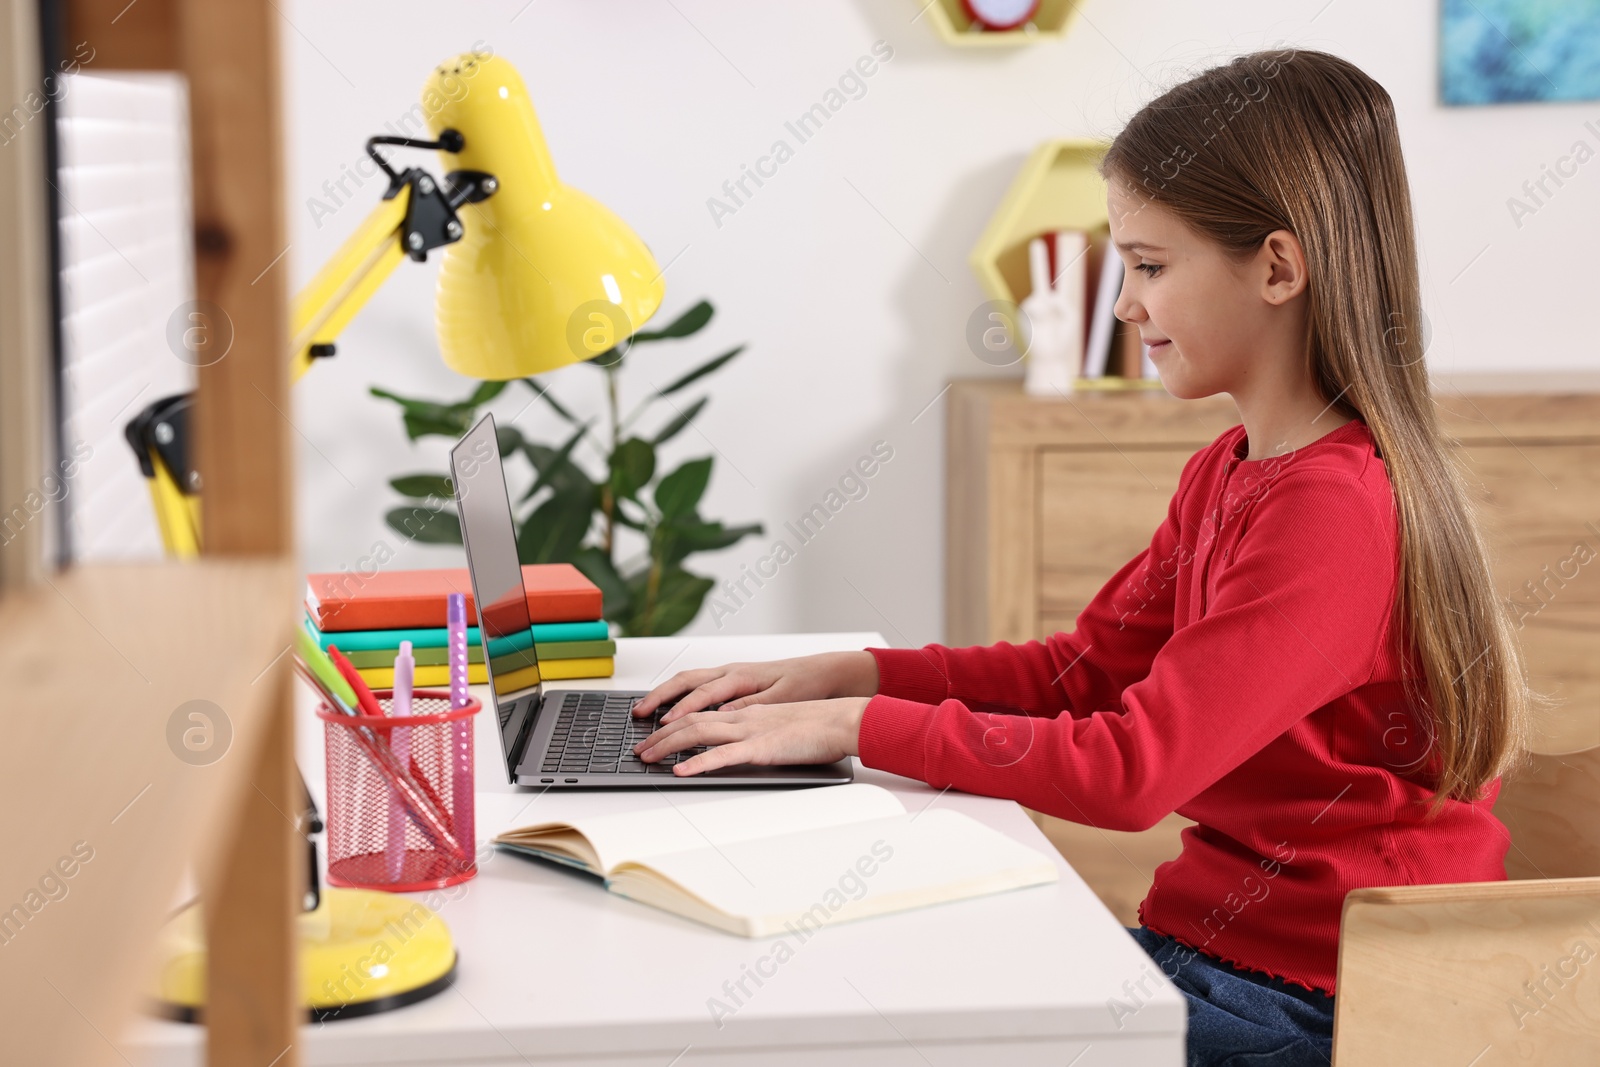 Photo of E-learning. Girl using laptop during online lesson at table indoors